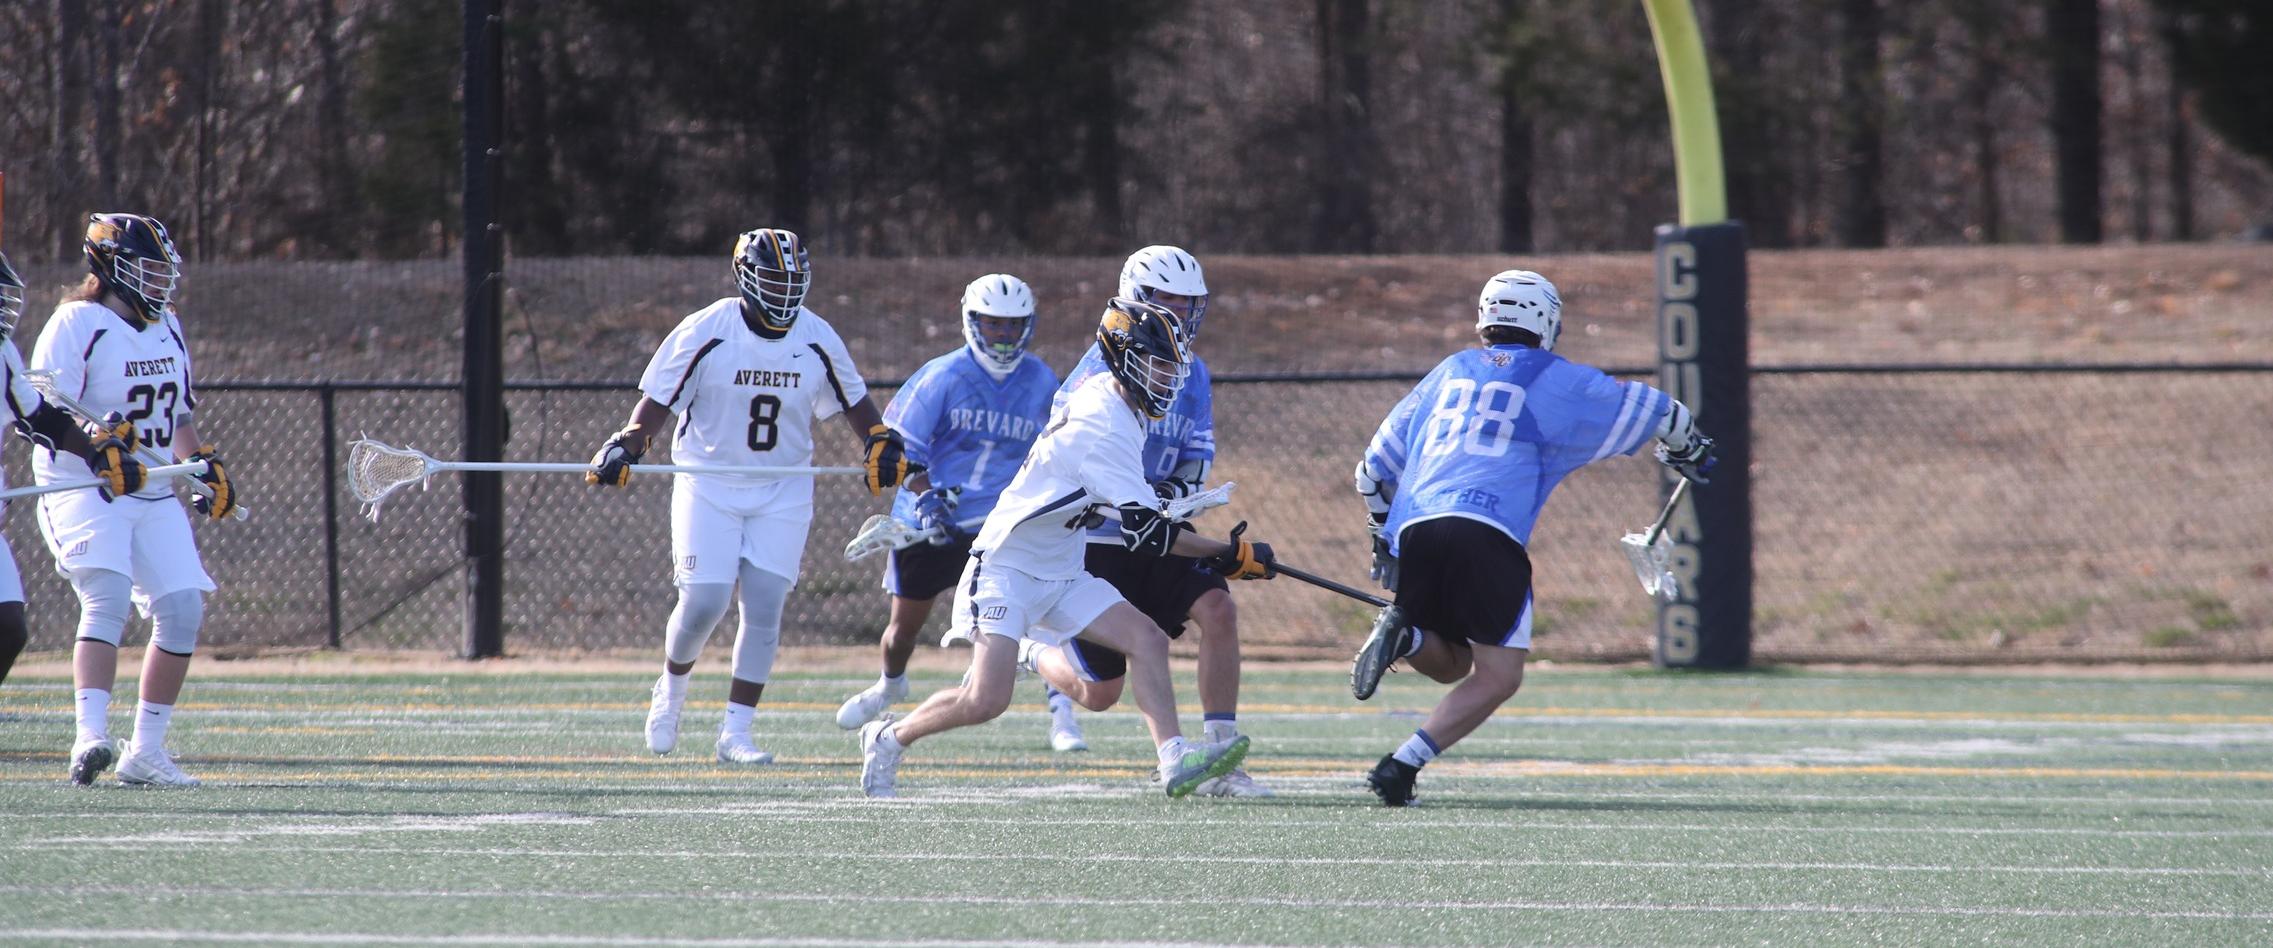 Senior attacker Sam Duffie tallied five points (four goals, one assist) on Friday afternoon at Averett (Photo courtesy of David Conner II, Averett University).